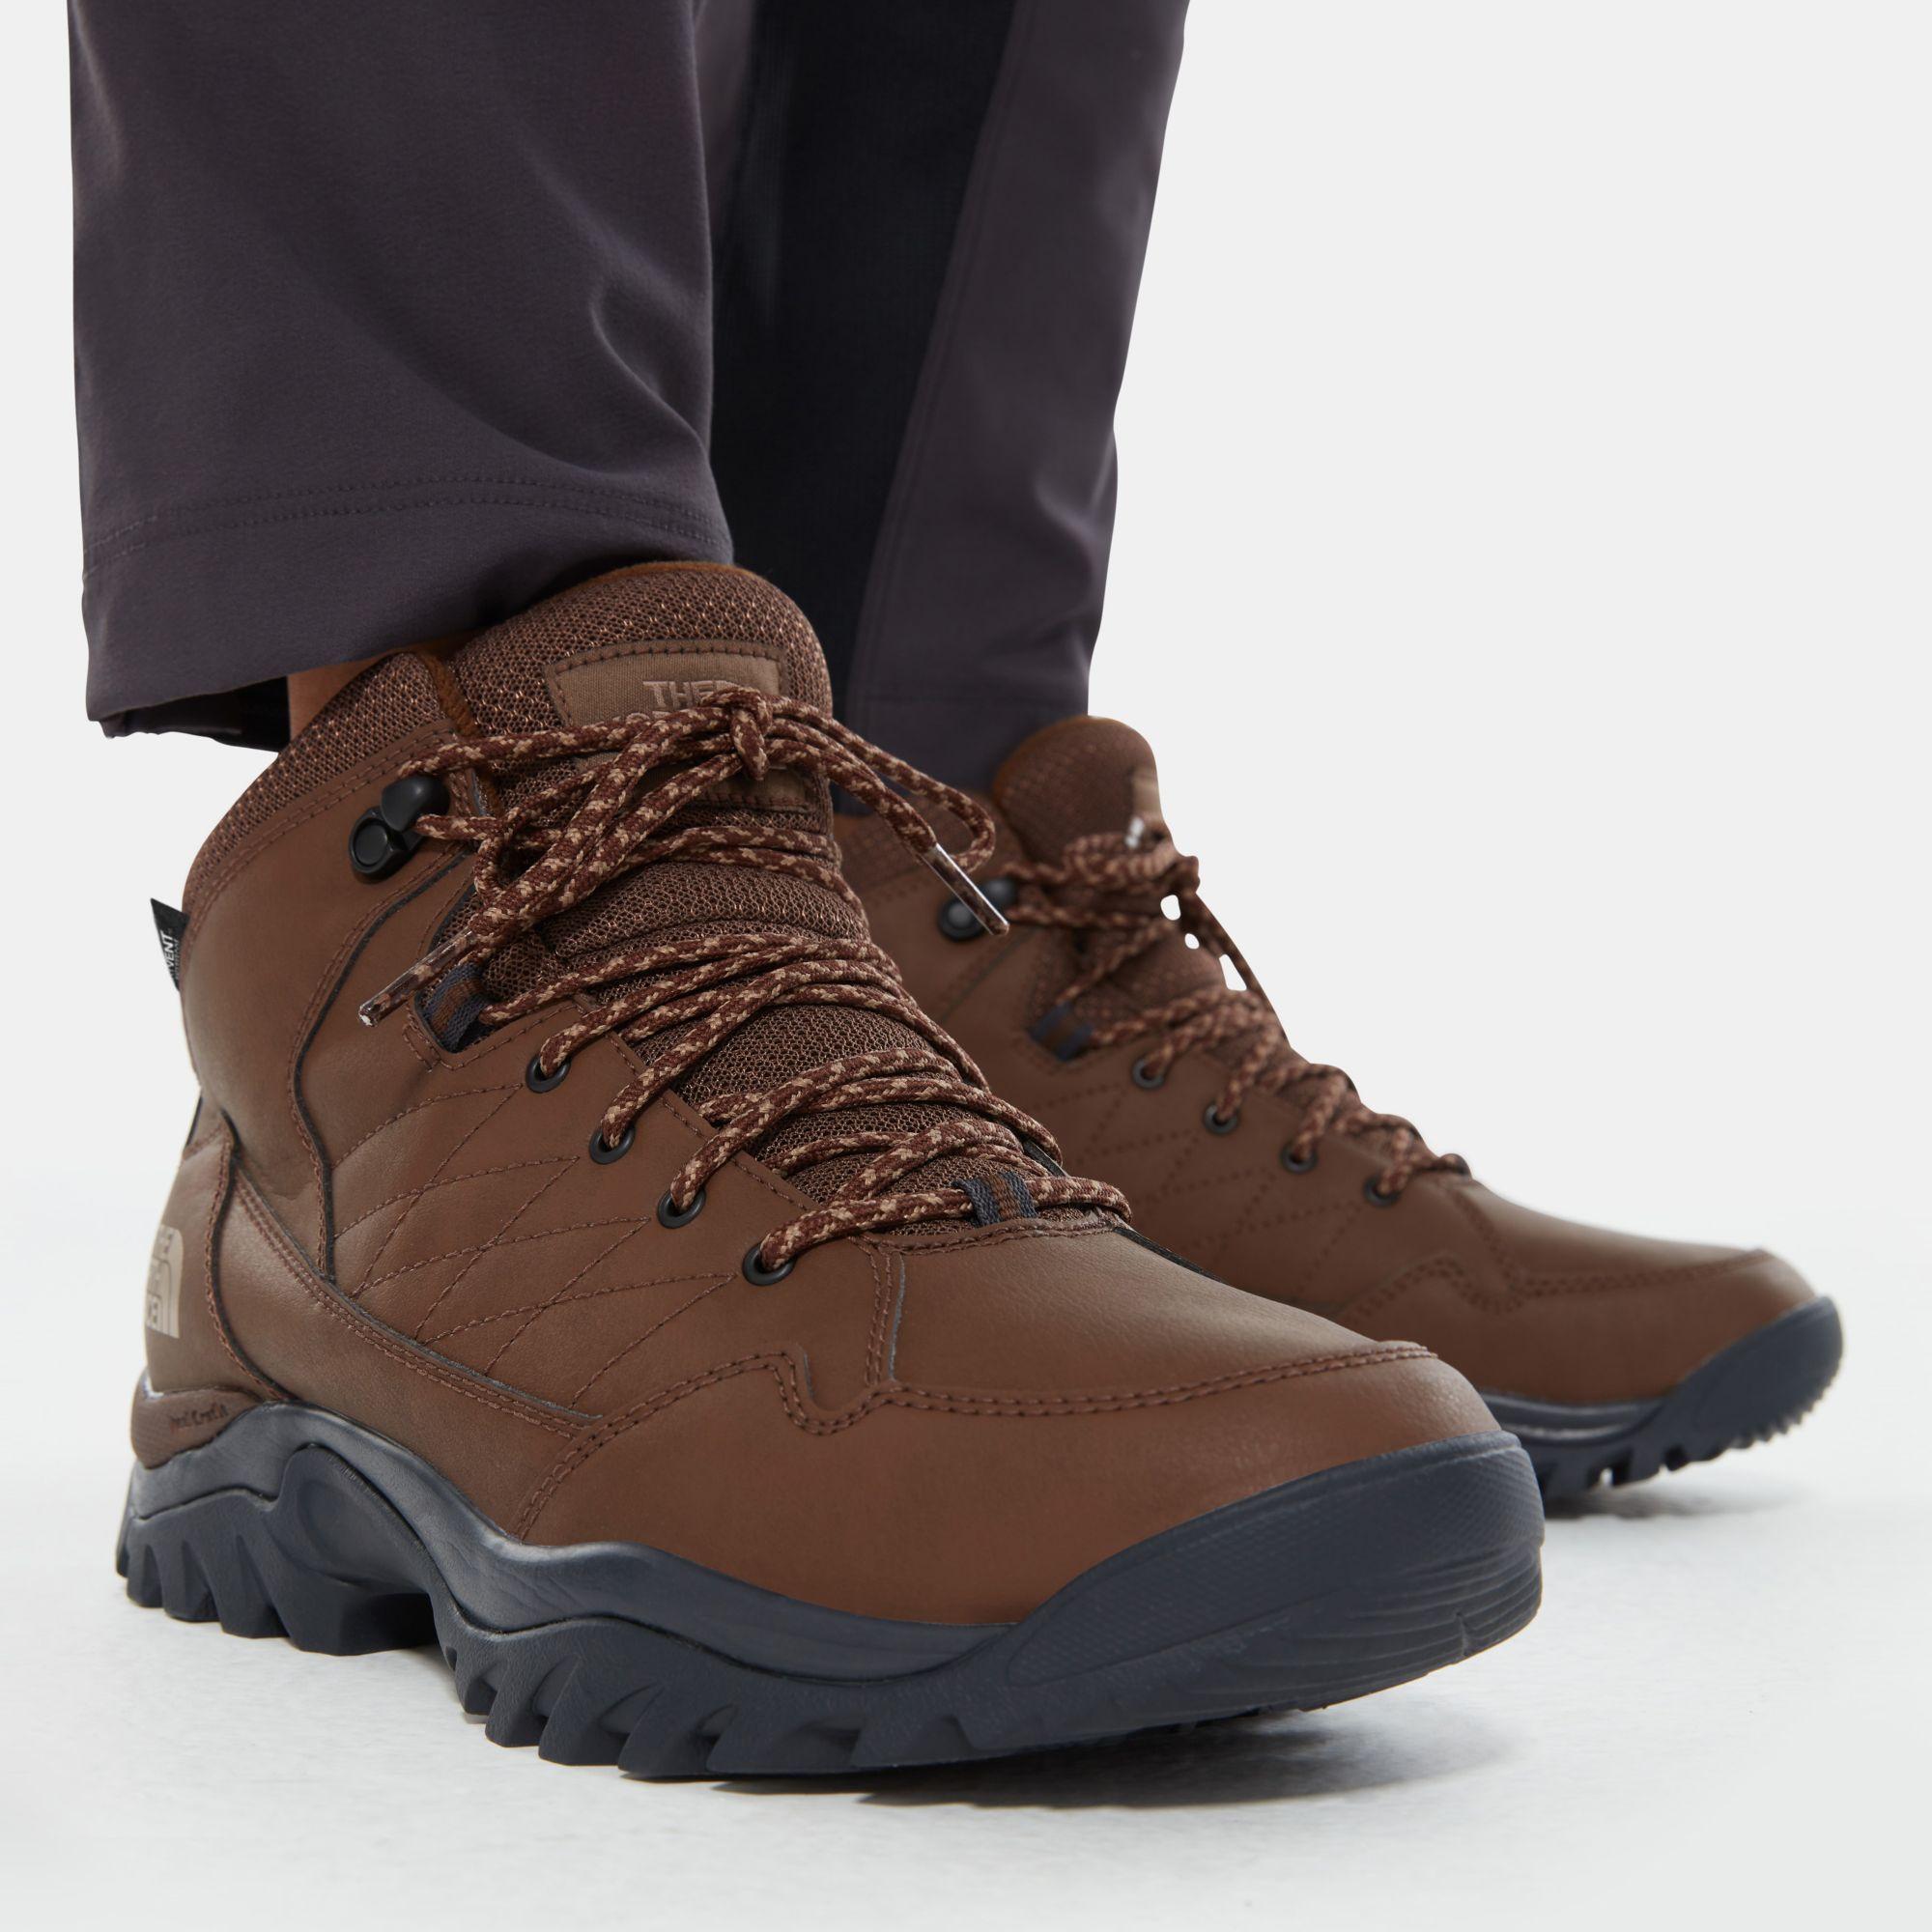 The North Face Storm Strike Ii Hike Boots in Grey (Grey) for Men - Lyst